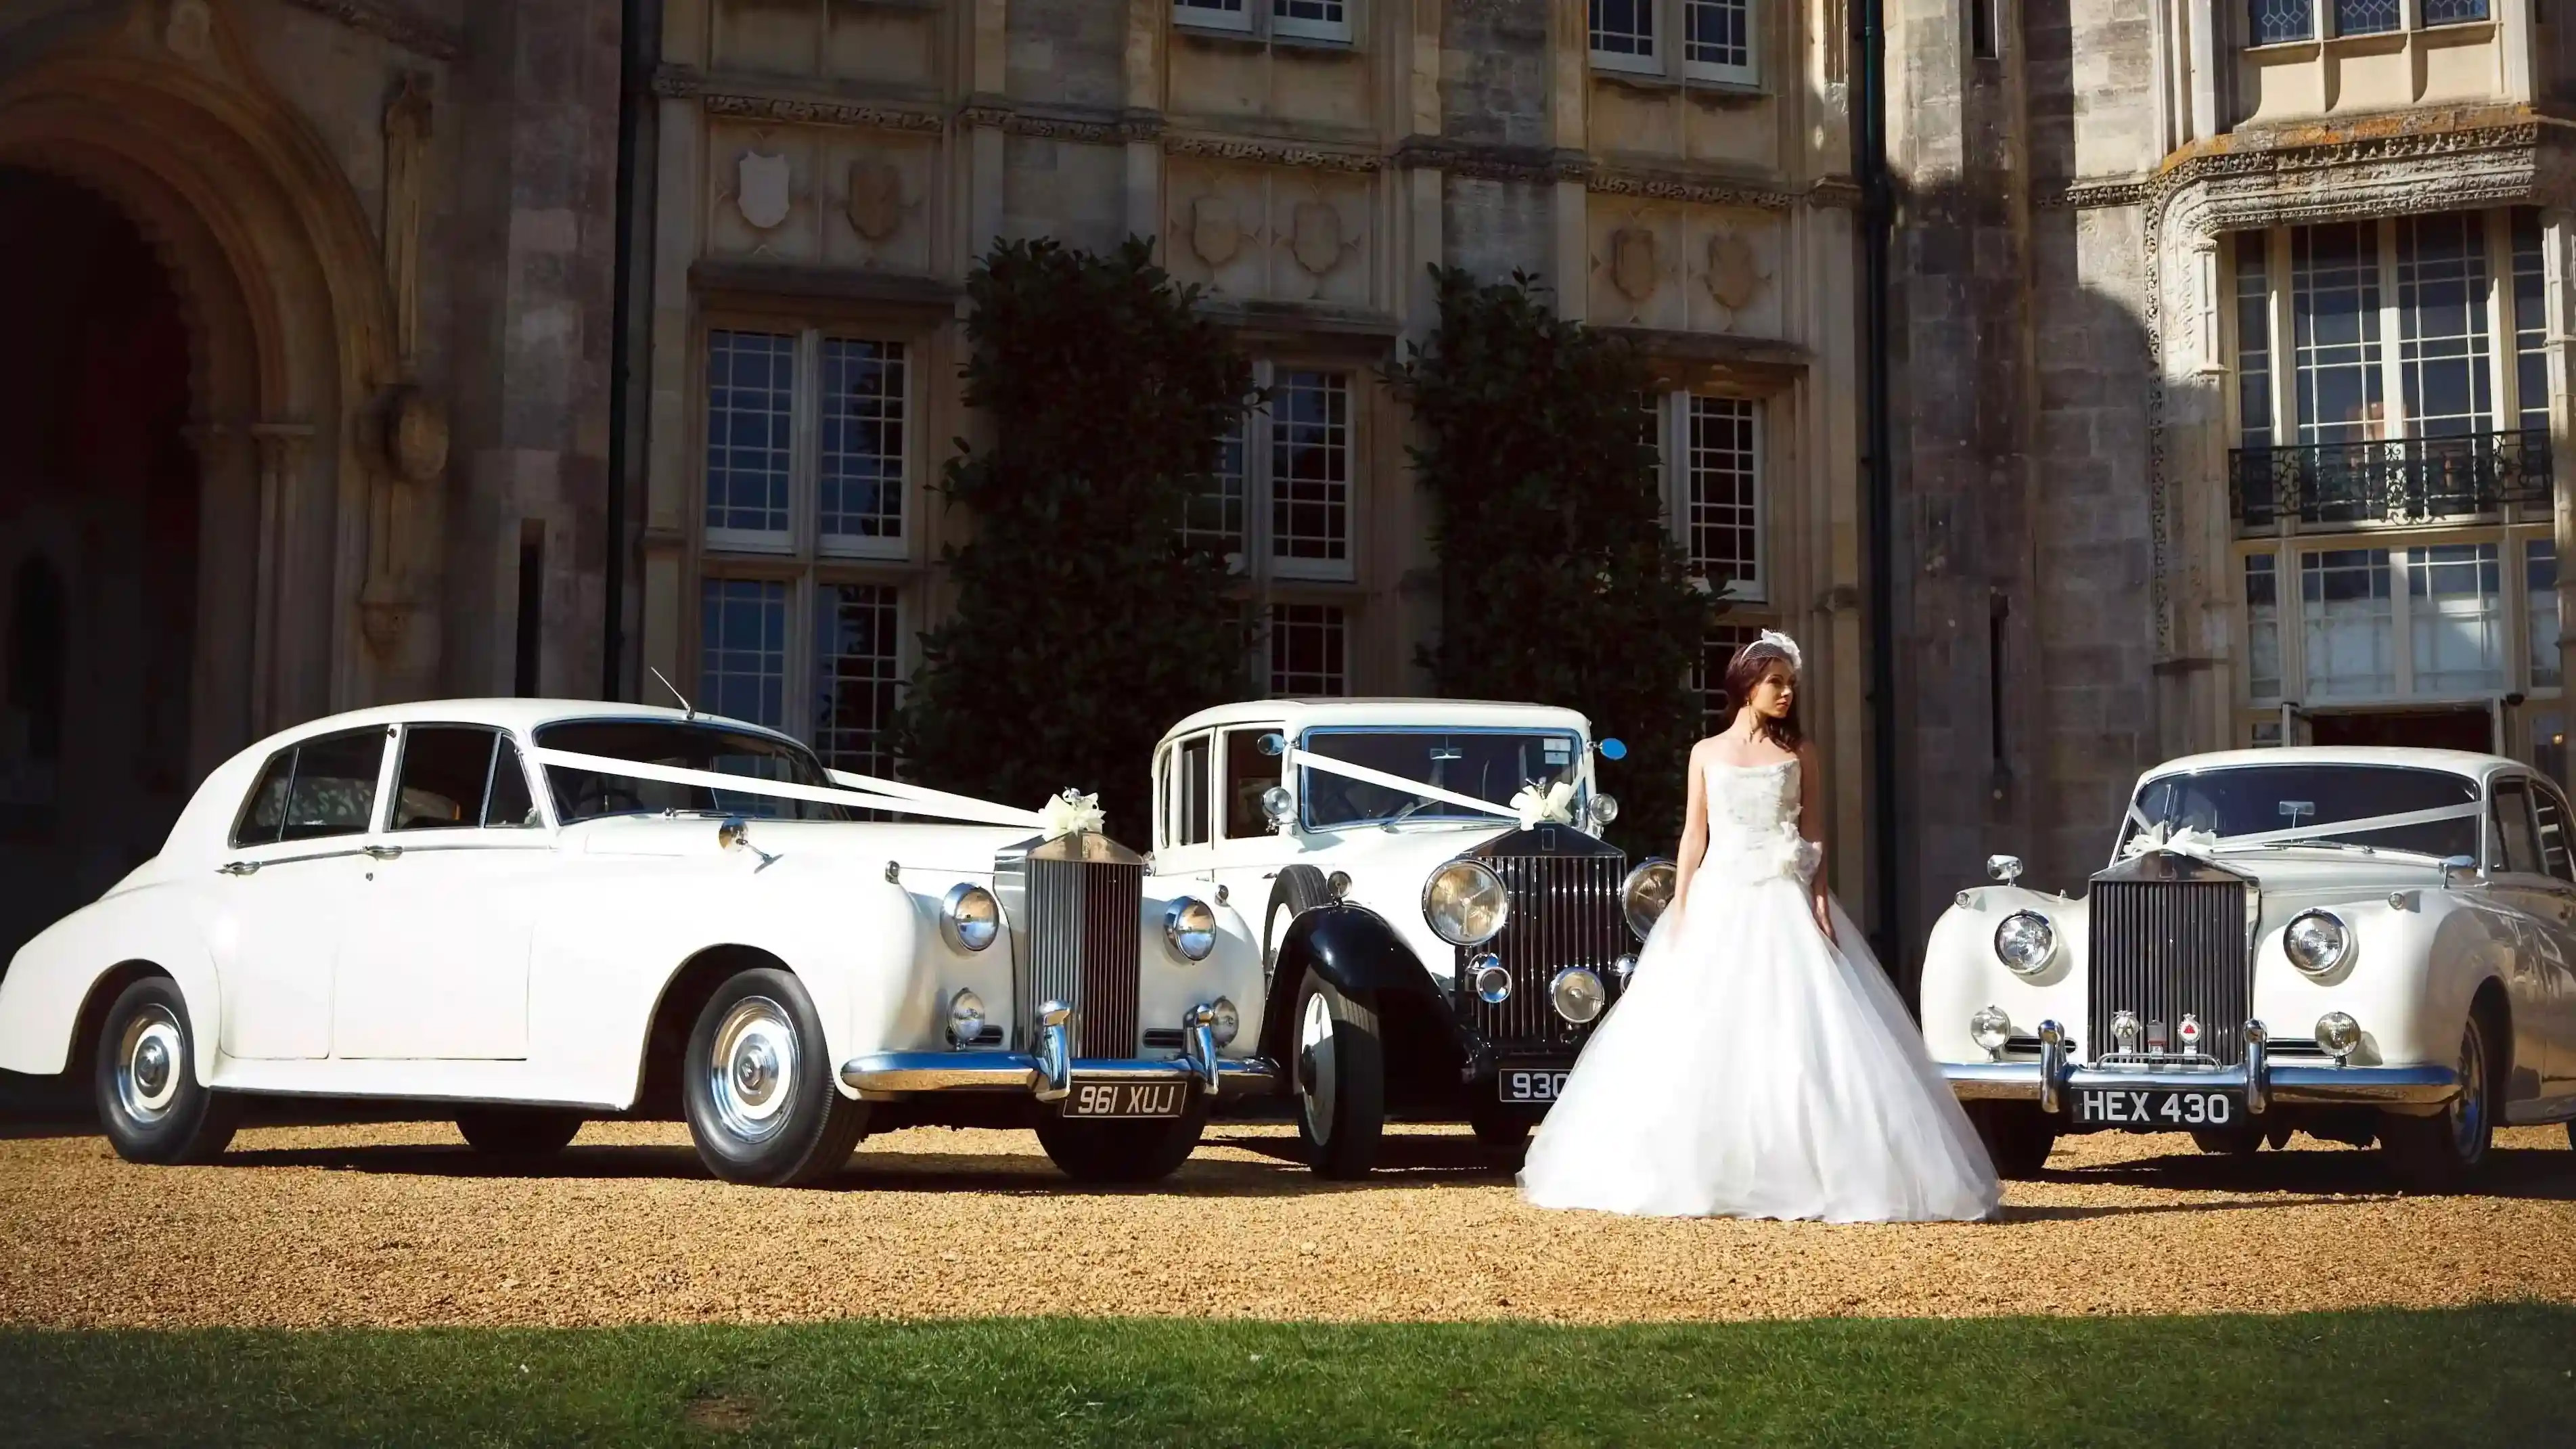 Selection of three classic and Vintage Rolls-Royce in White with Bride wearing a white wedding dress standing in the middle of the vehicles. Background is a popular wedding venue in the style of a castle in Bedfordshire.